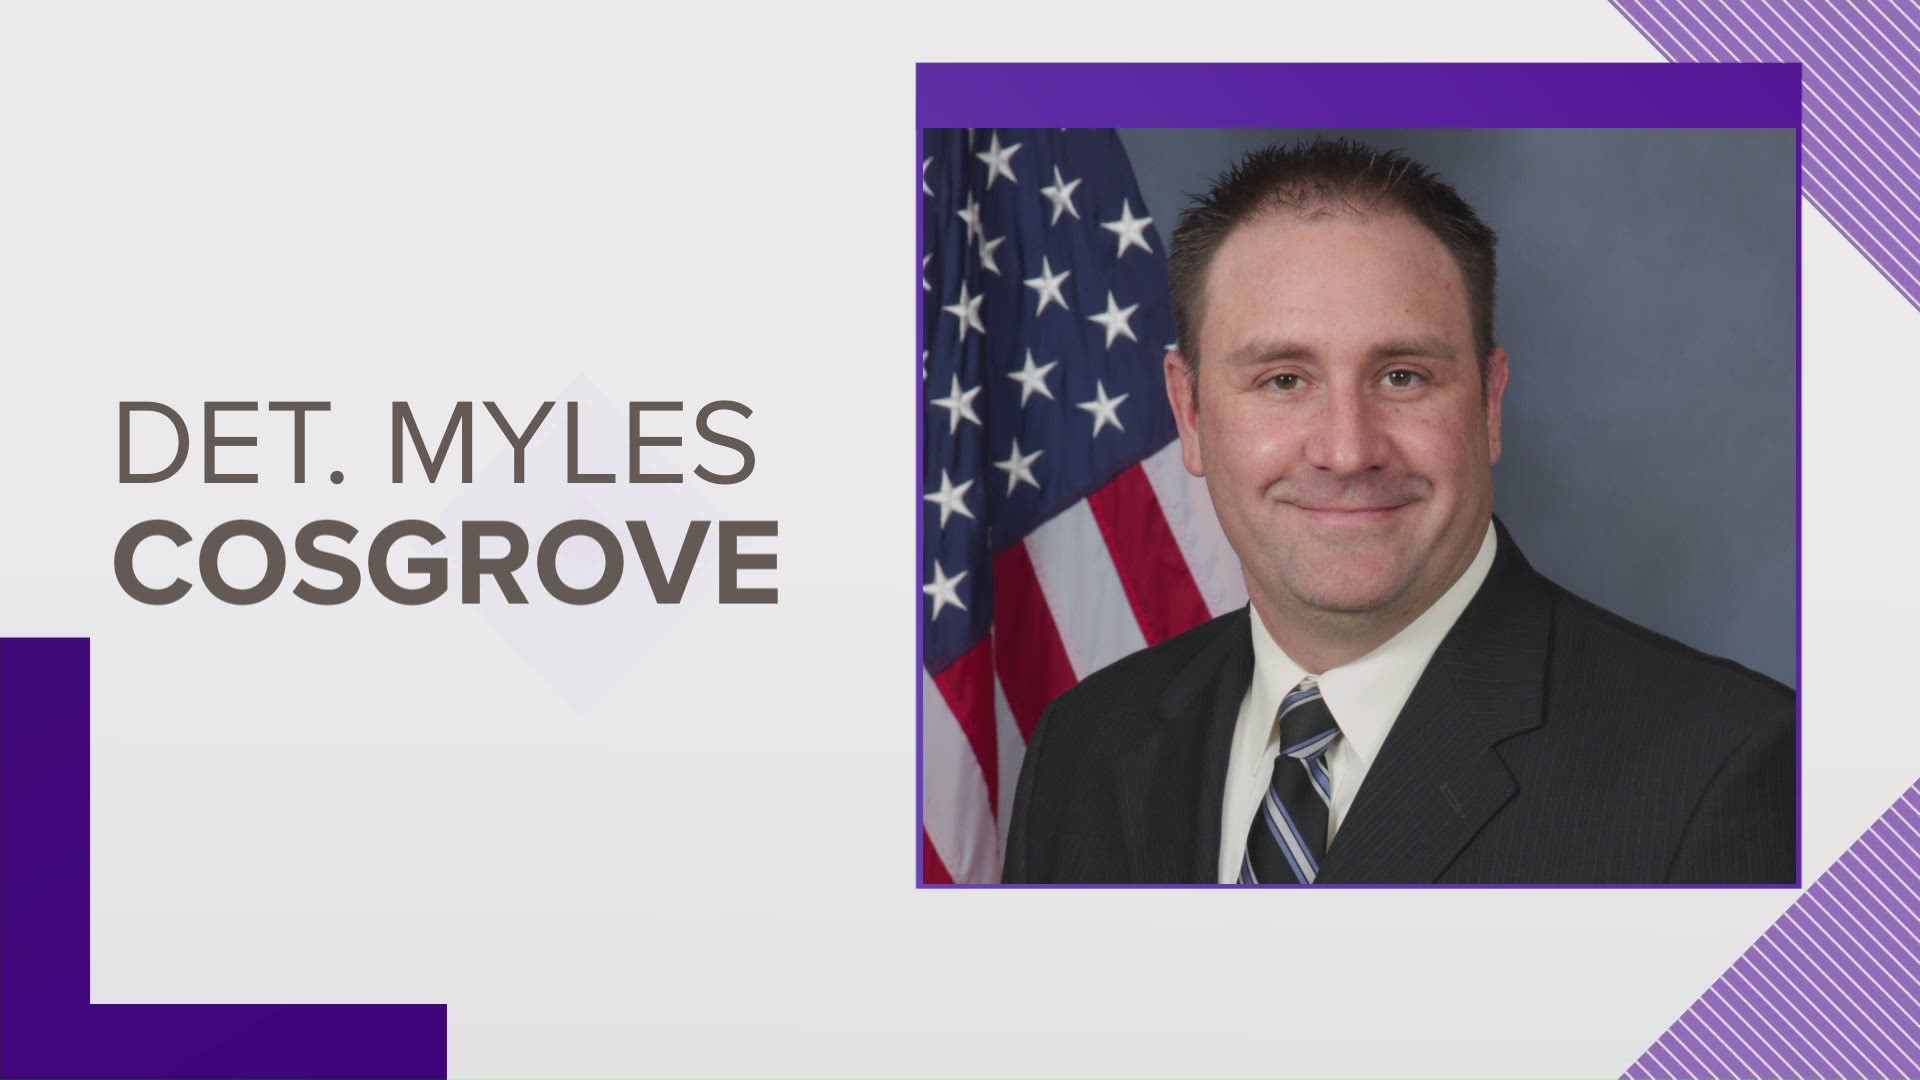 The family of Myles Cosgrove is raising money to help Cosgrove retire, siting safety concerns.